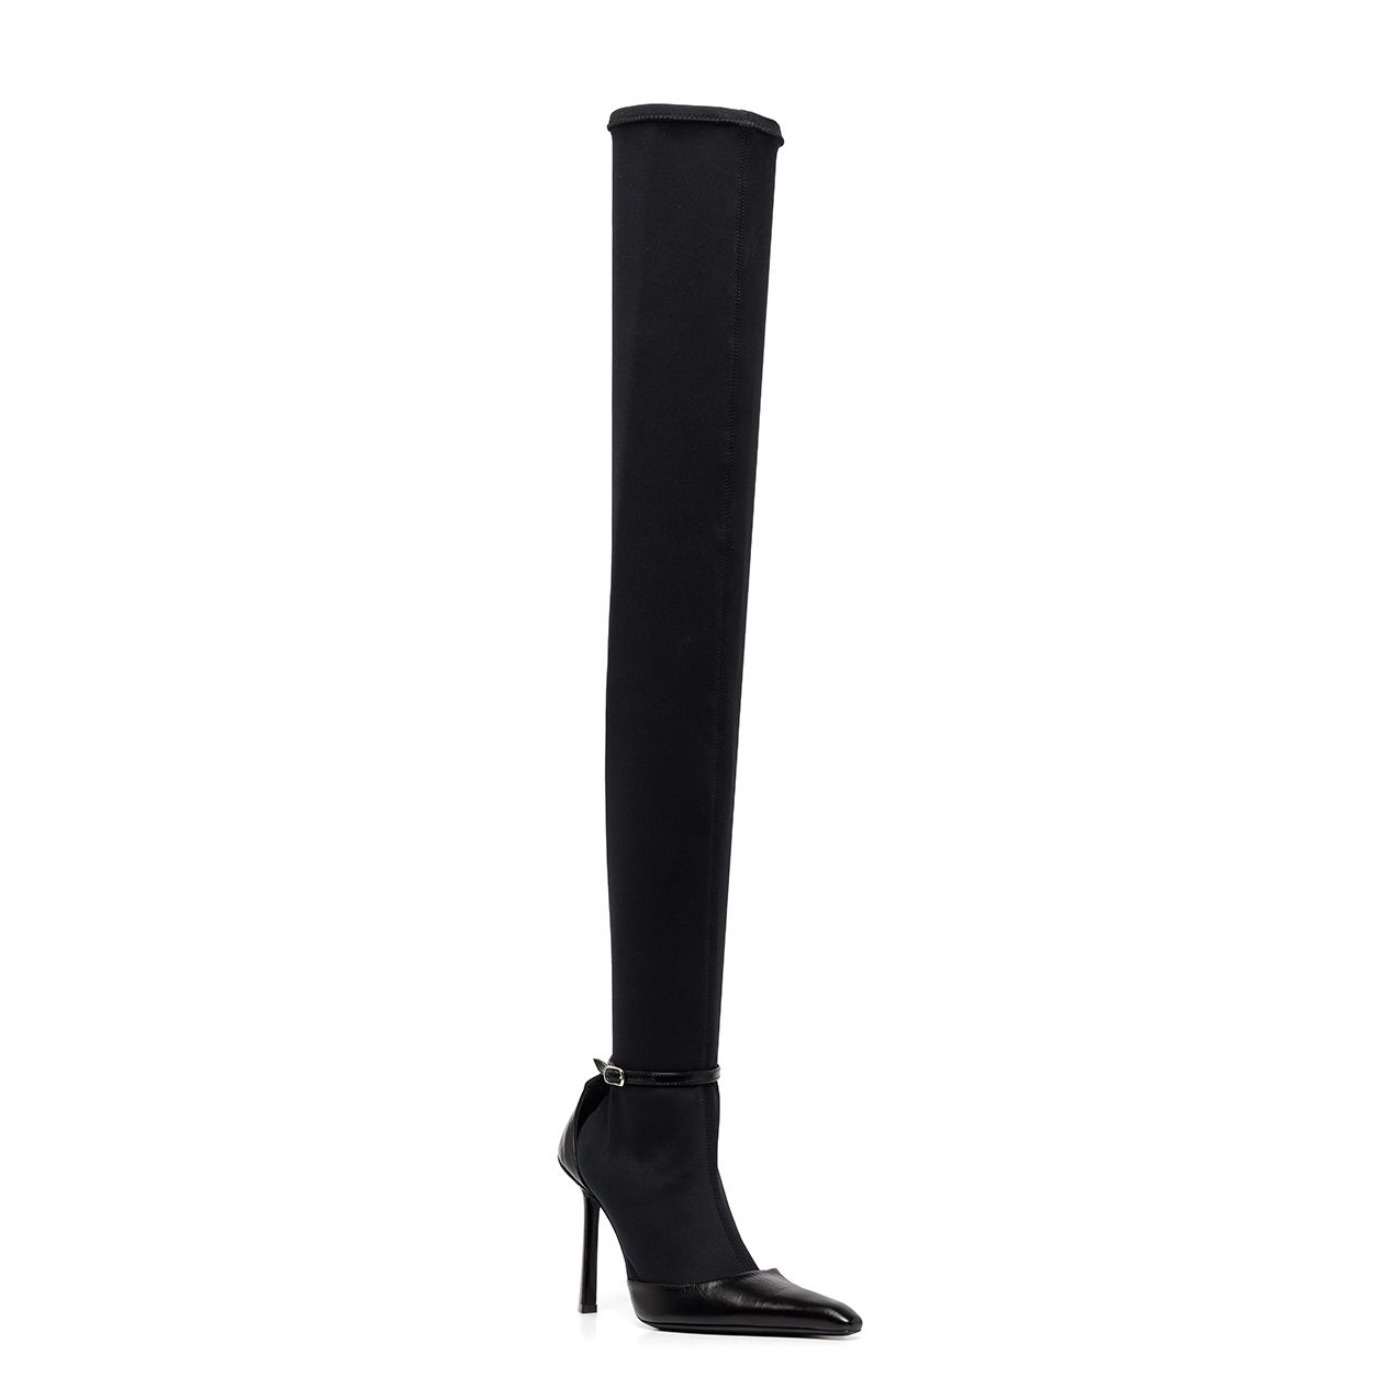 Sock-style thigh-high boots